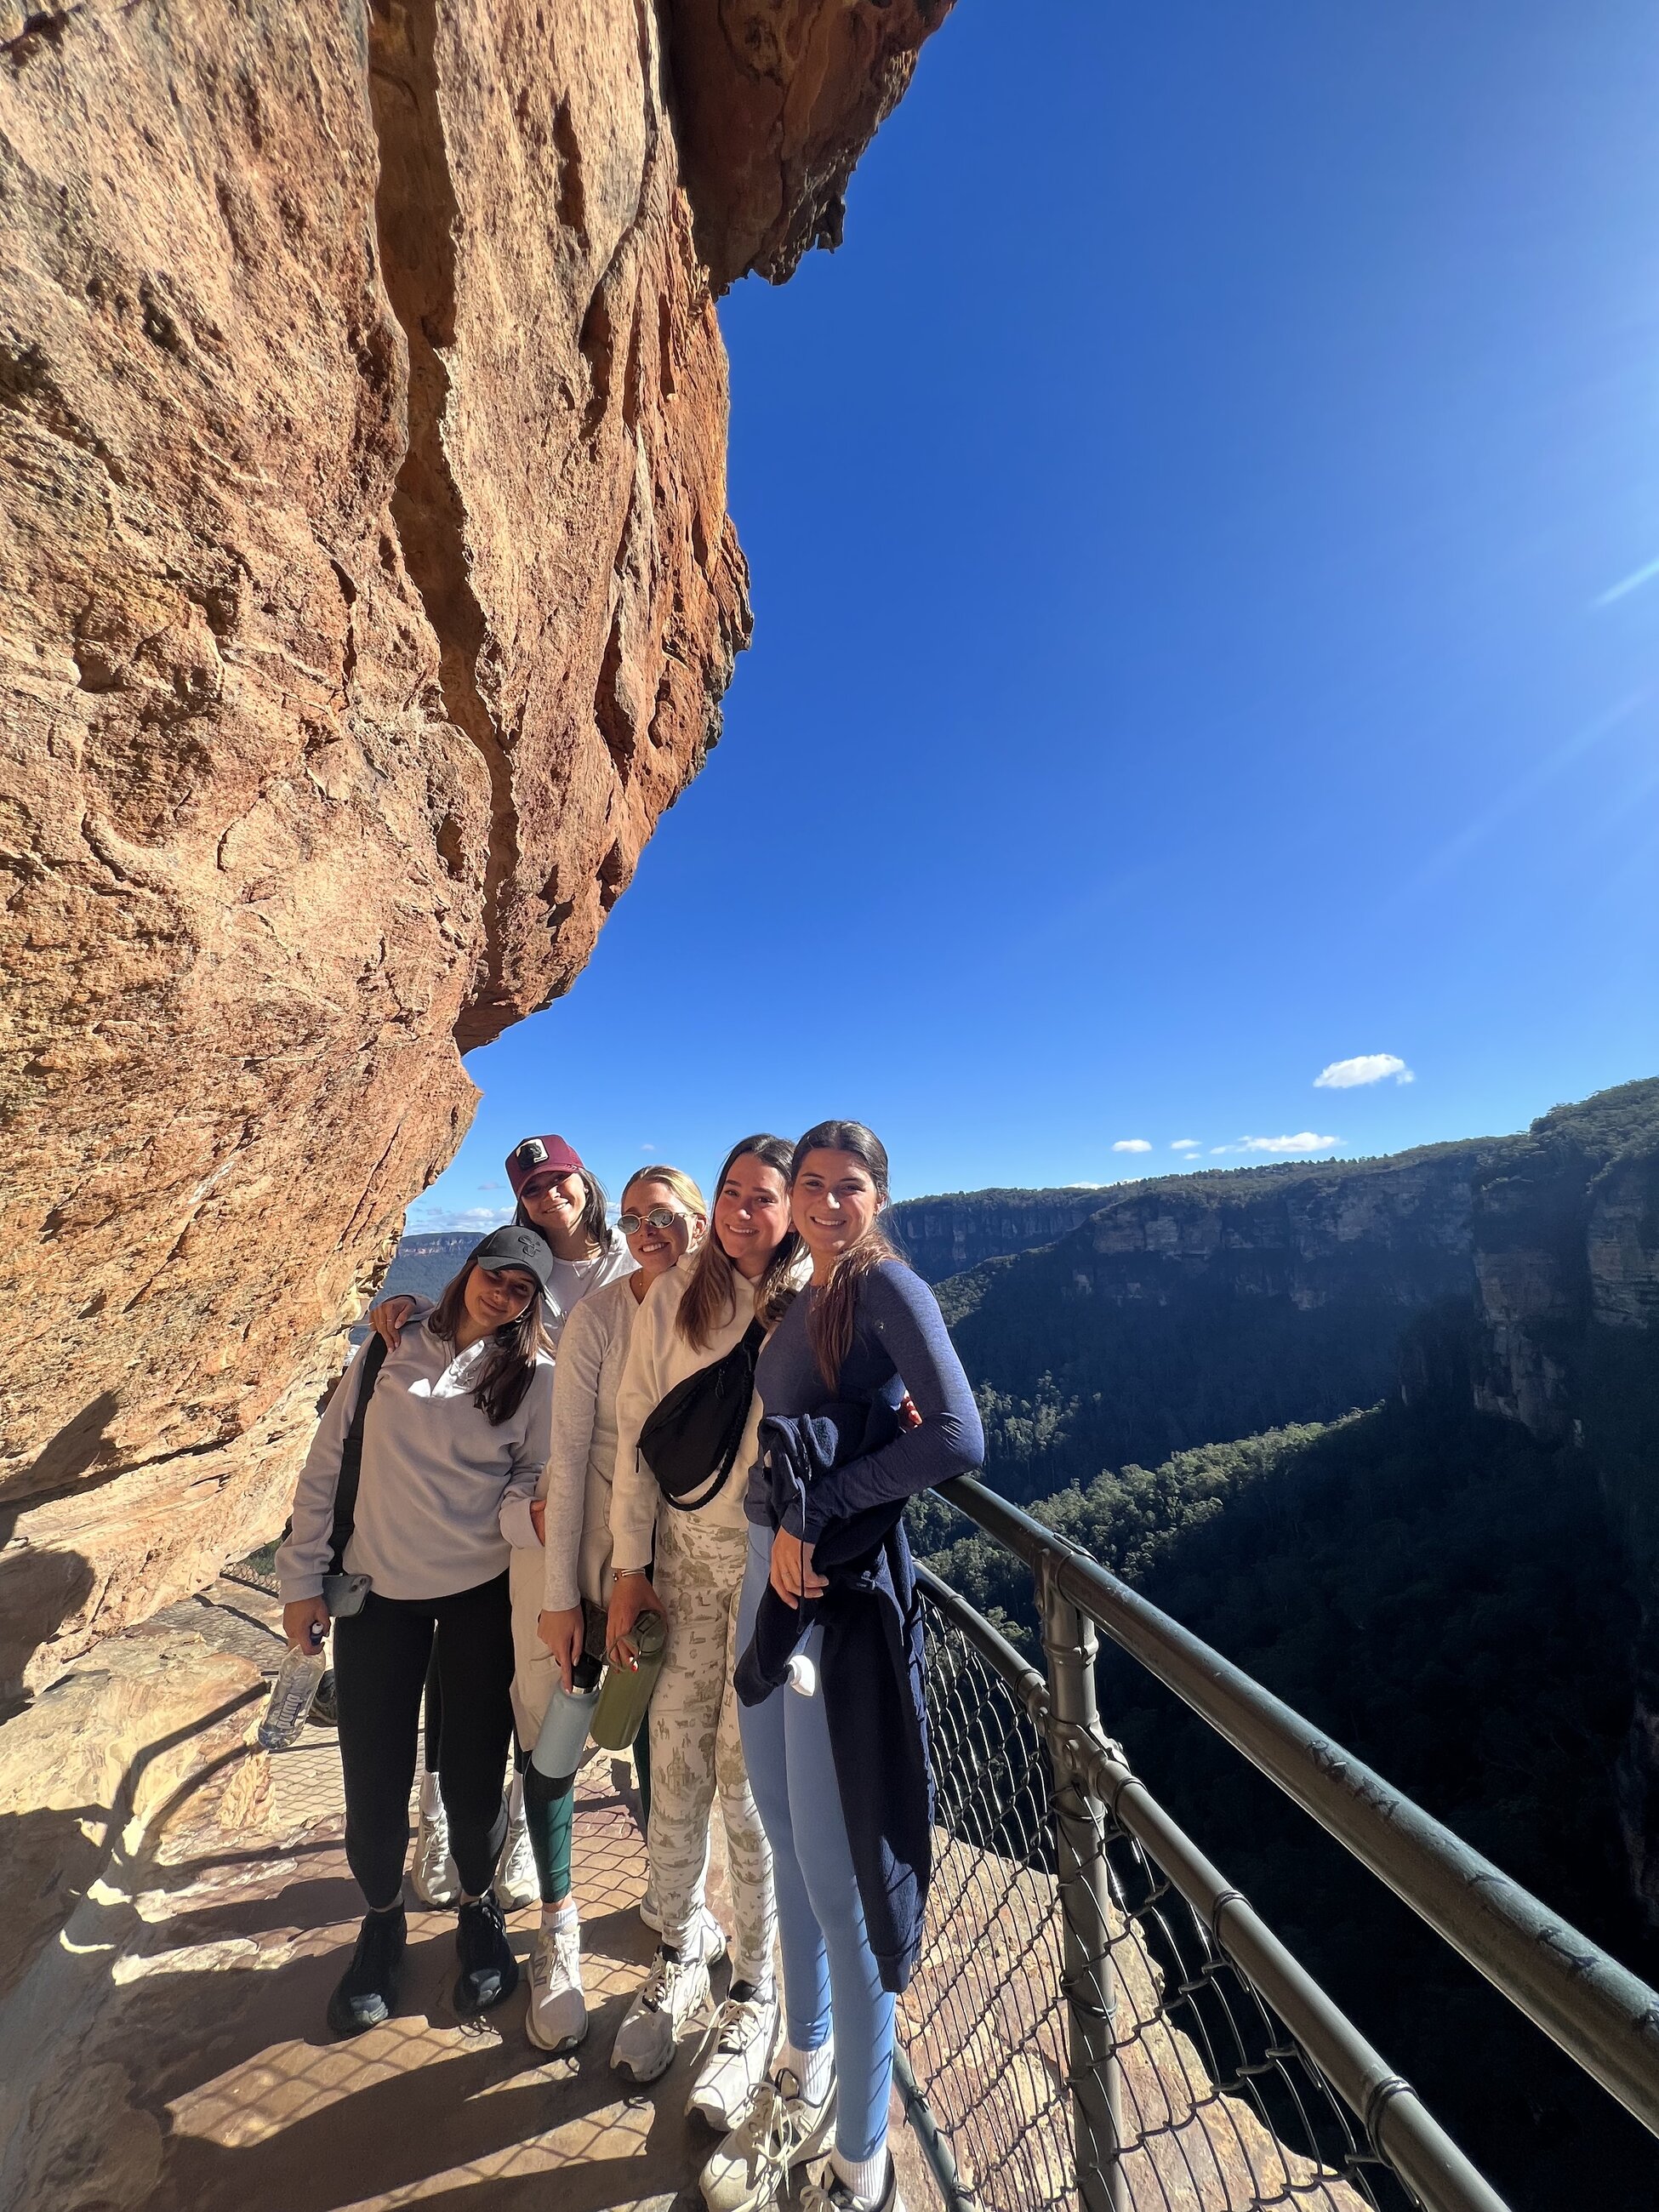 Hiking around The Blue Mountains with friends from the TEAN program